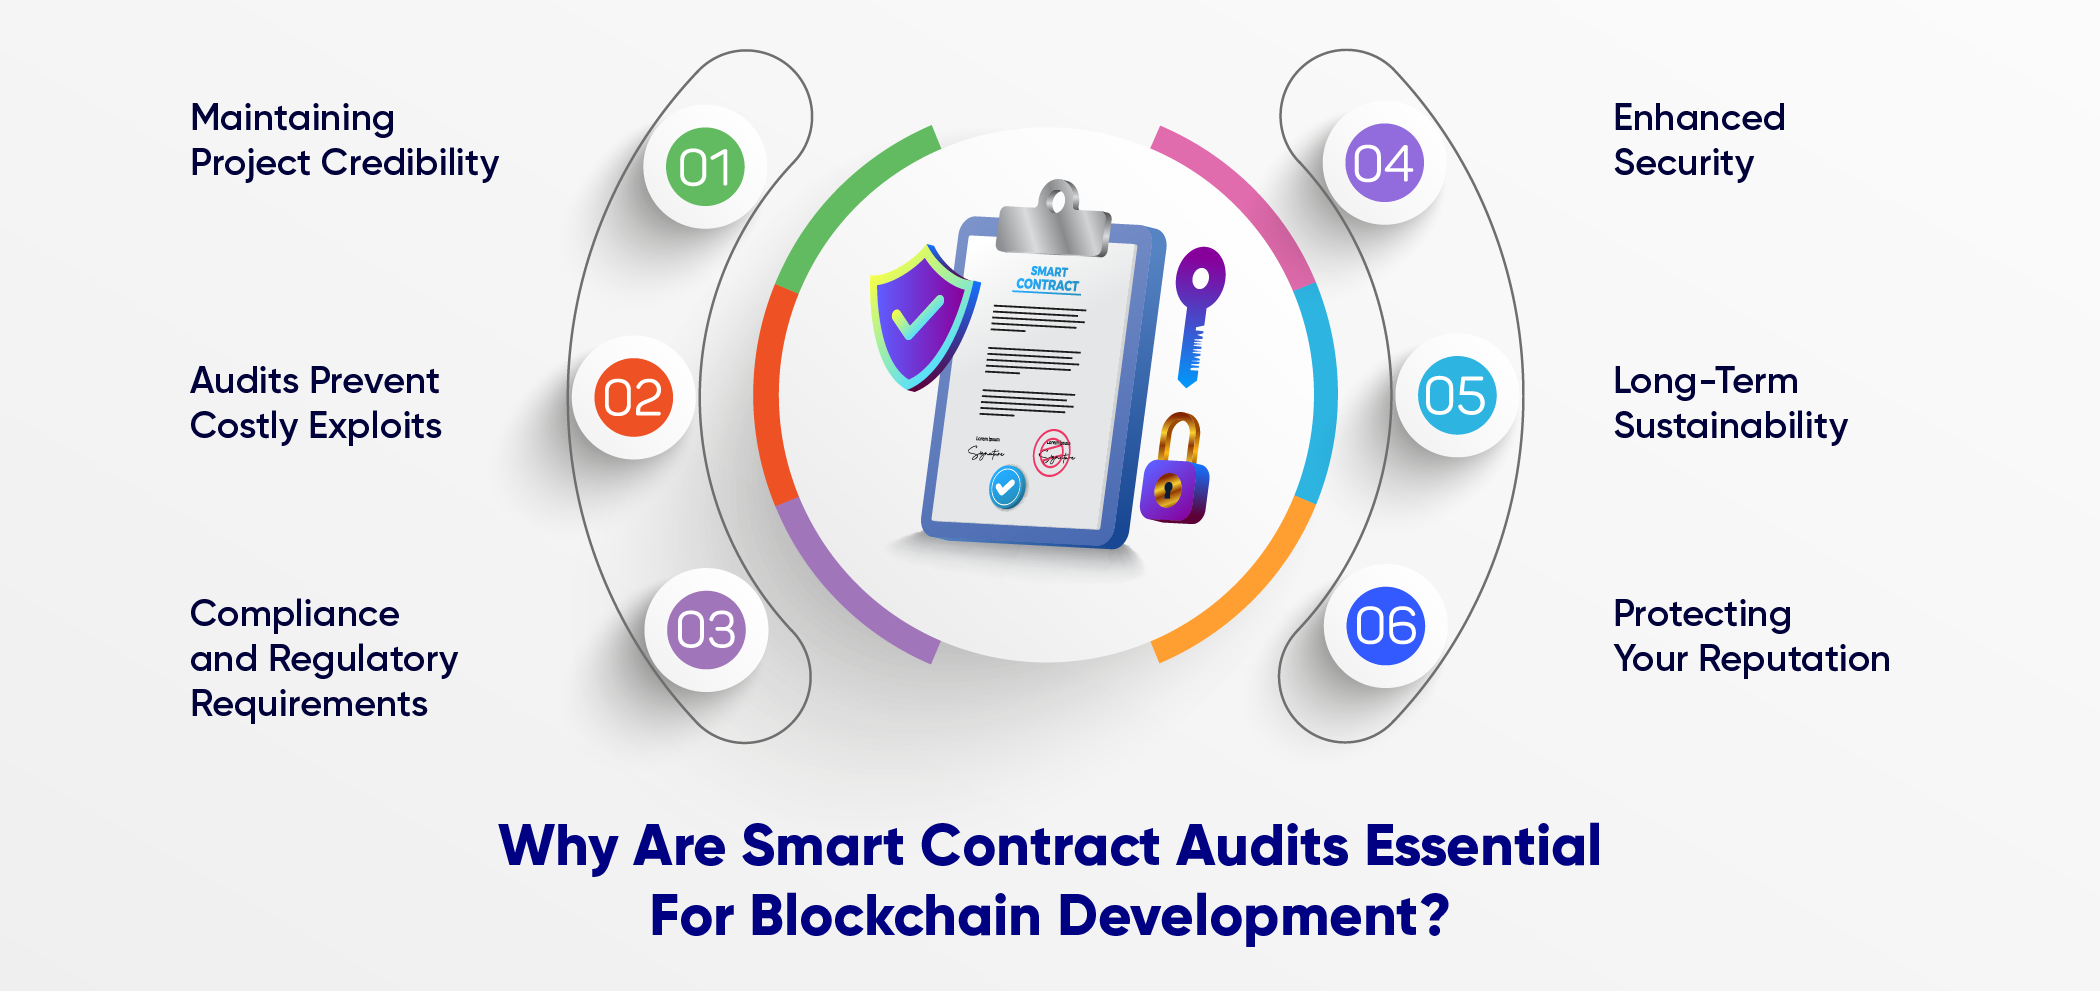 Smart Contract Audits Essential